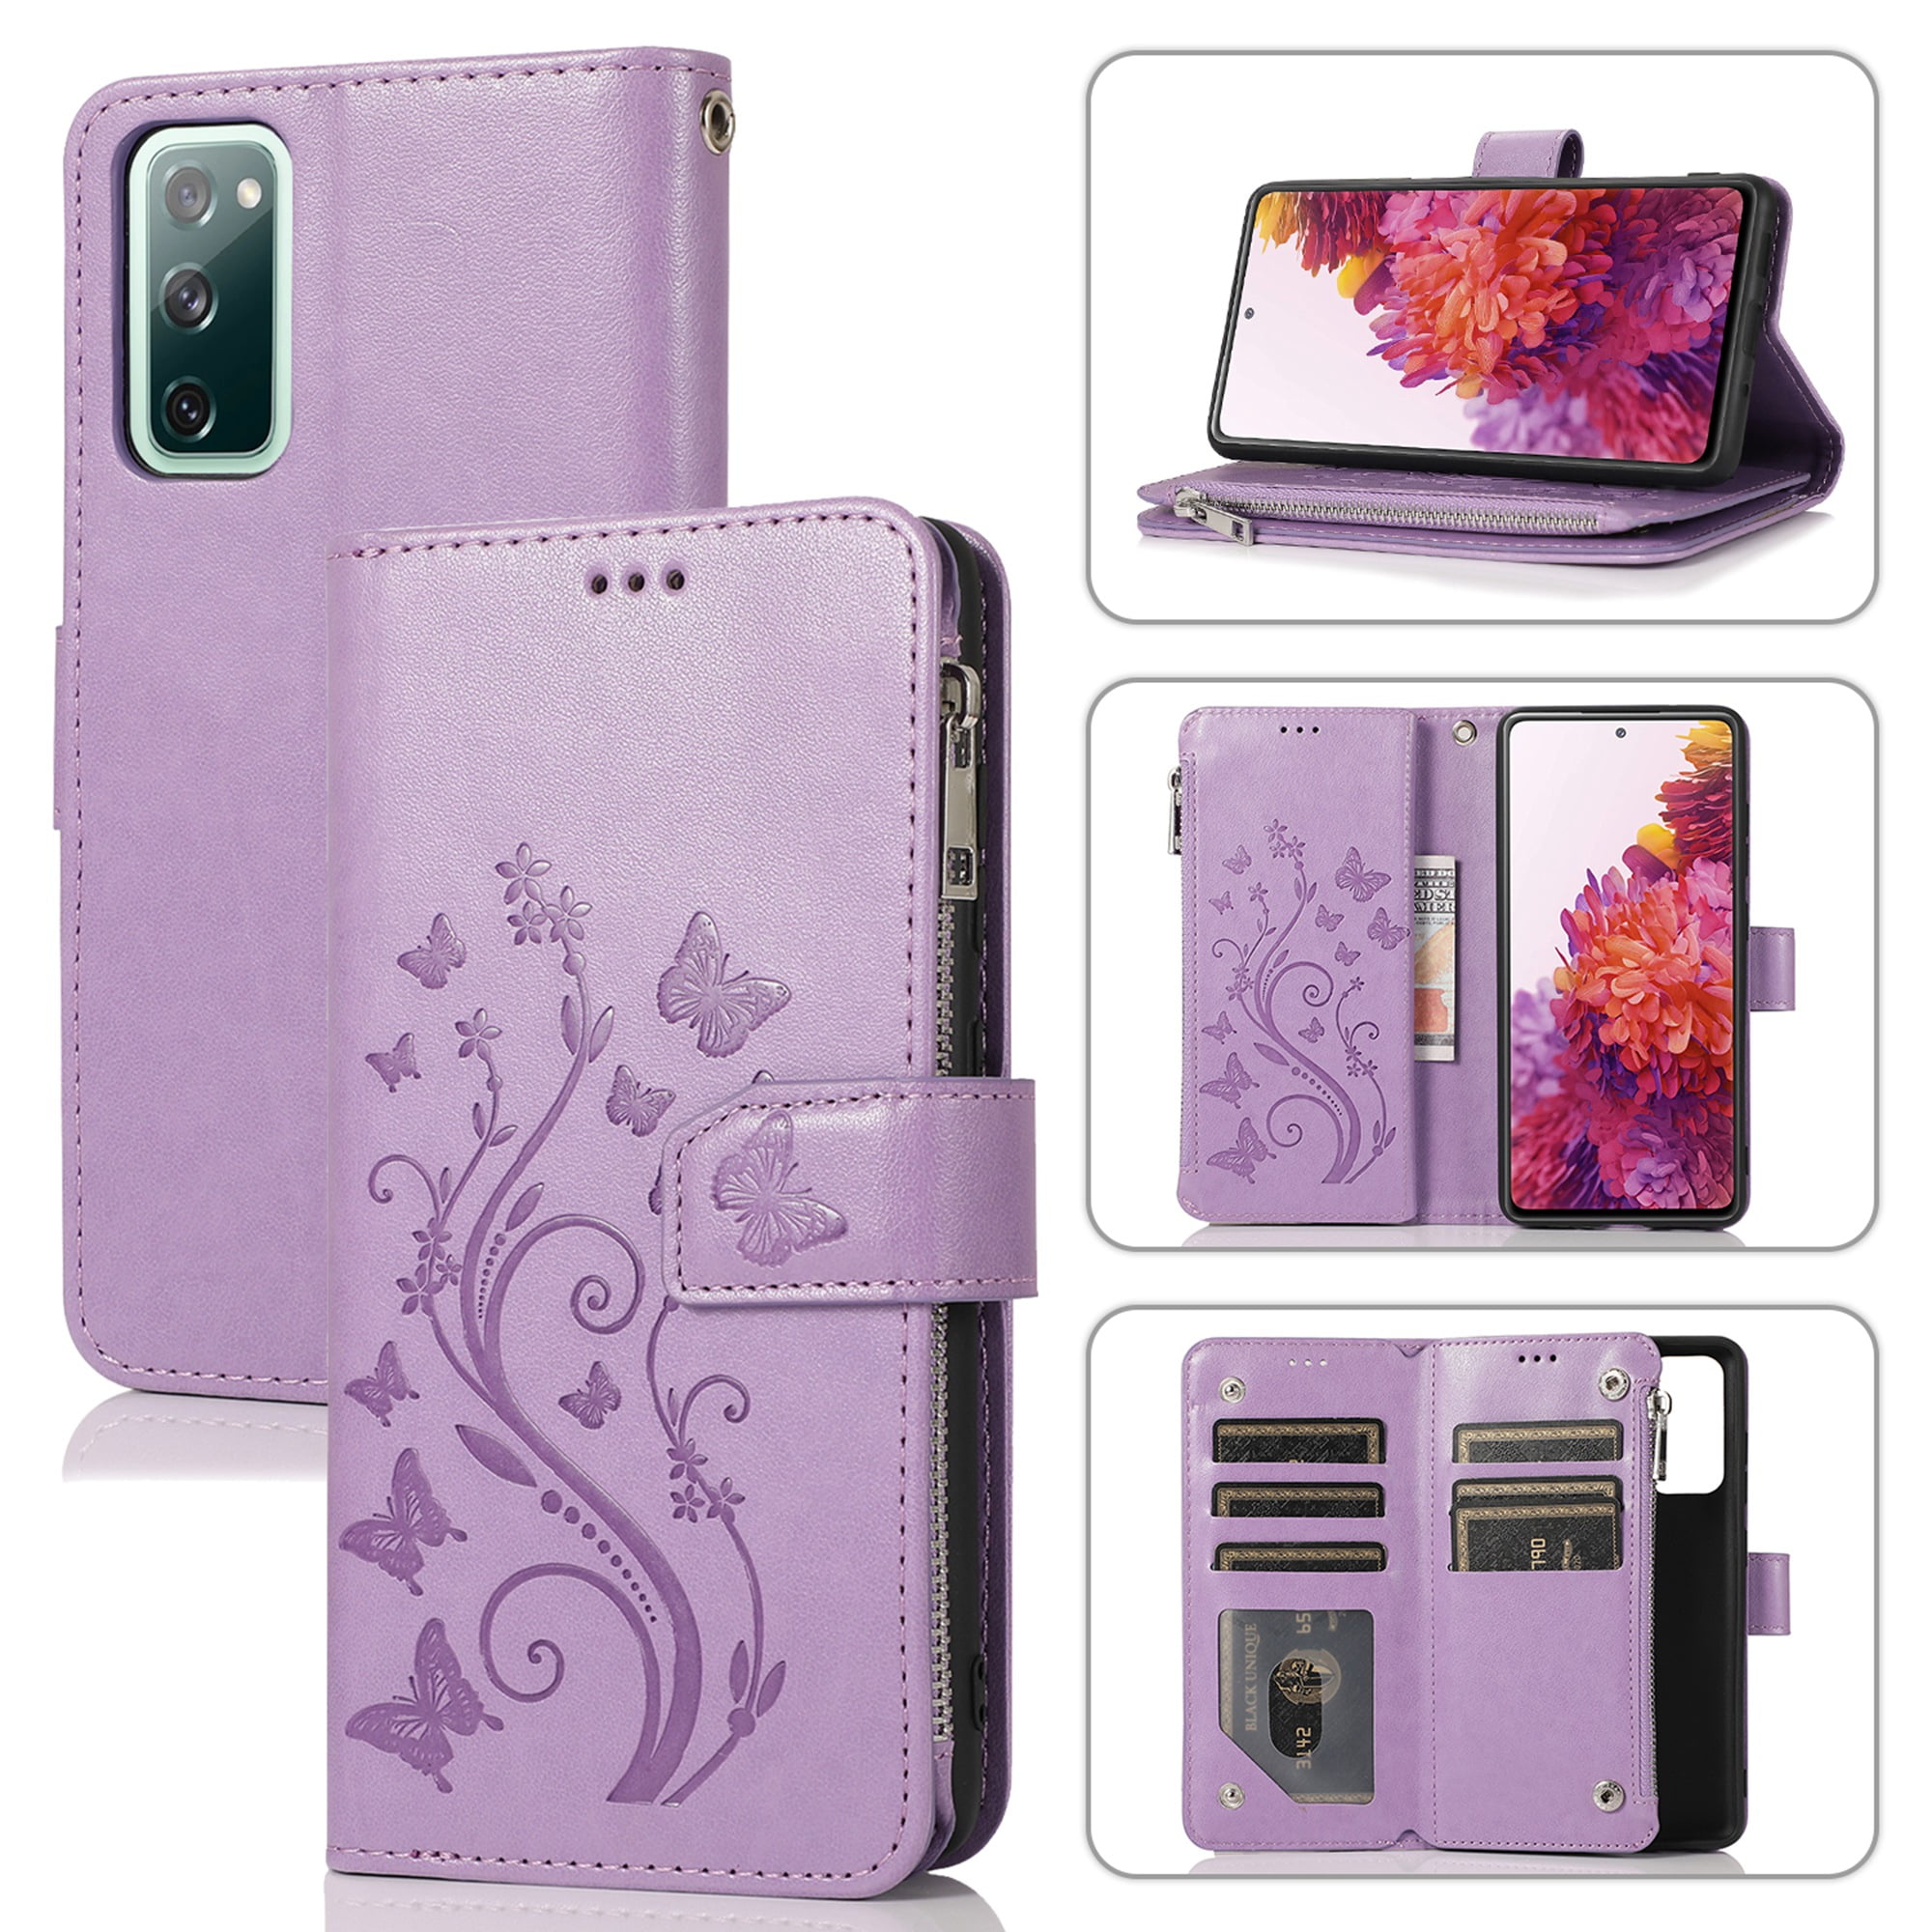 Dteck Samsung Galaxy S20 FE (Fan Edition) Case, Folio Case Embossed PU Leather Zipper Pocket Credit Card Holder Wallet Phone Case with Wrist Strap for Samsung Galaxy S20 FE 5G / 4G, Purple